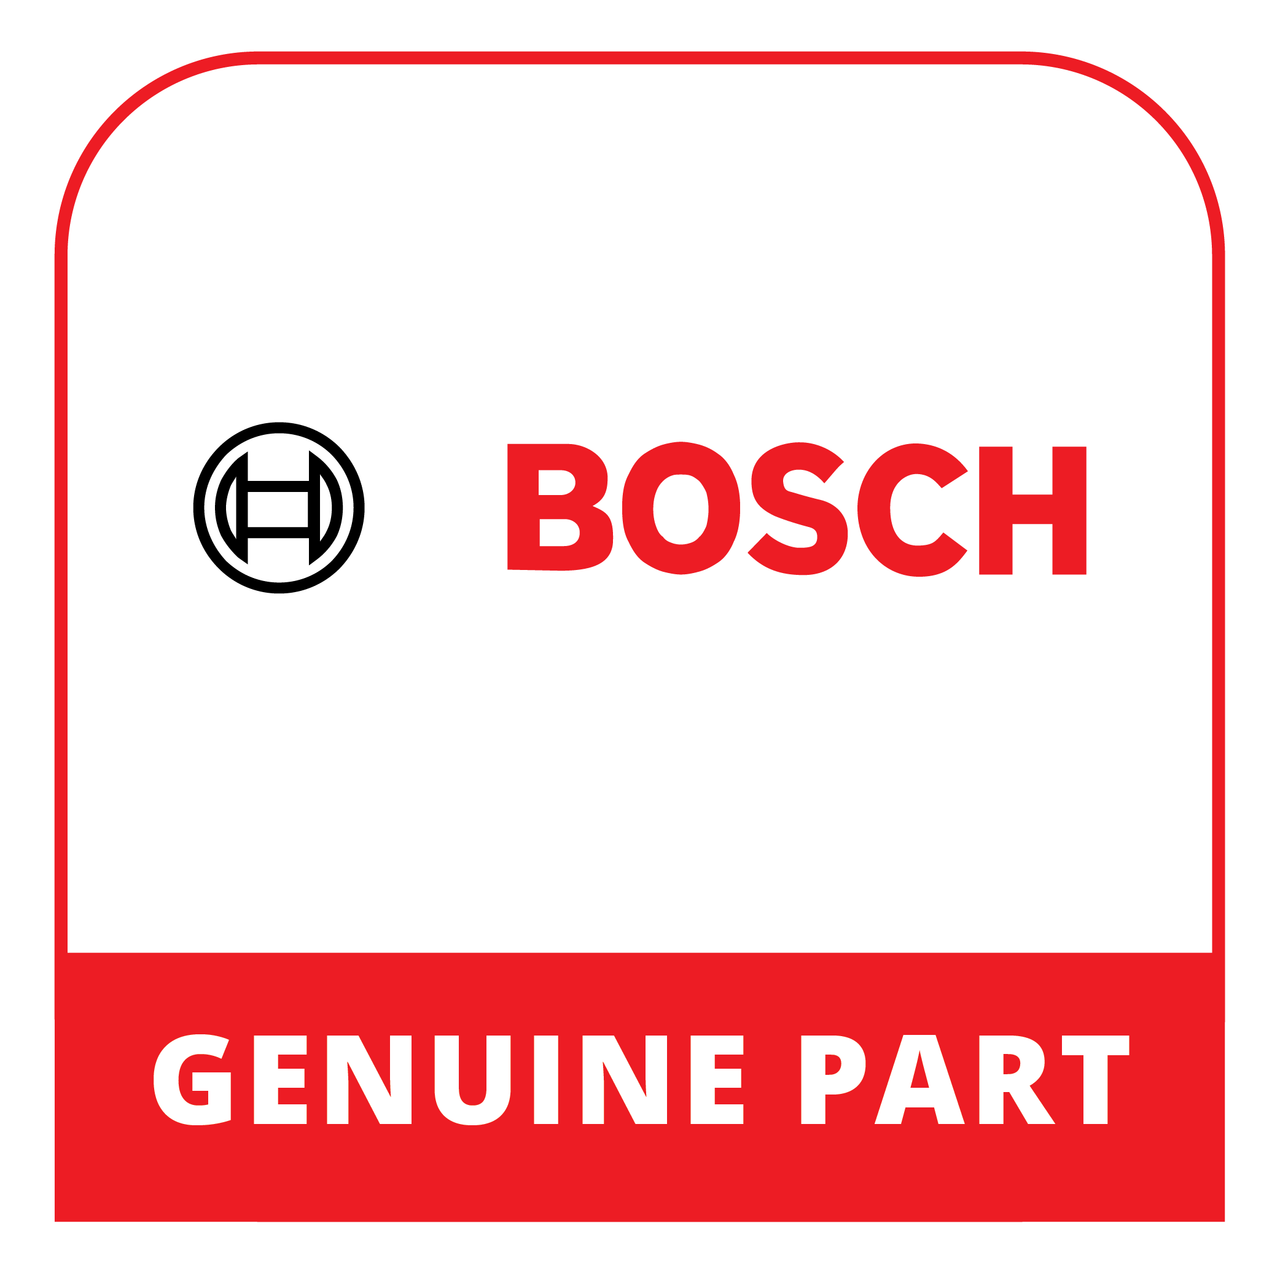 Bosch (Thermador) 20002806 - Panel-Base - Genuine Bosch (Thermador) Part